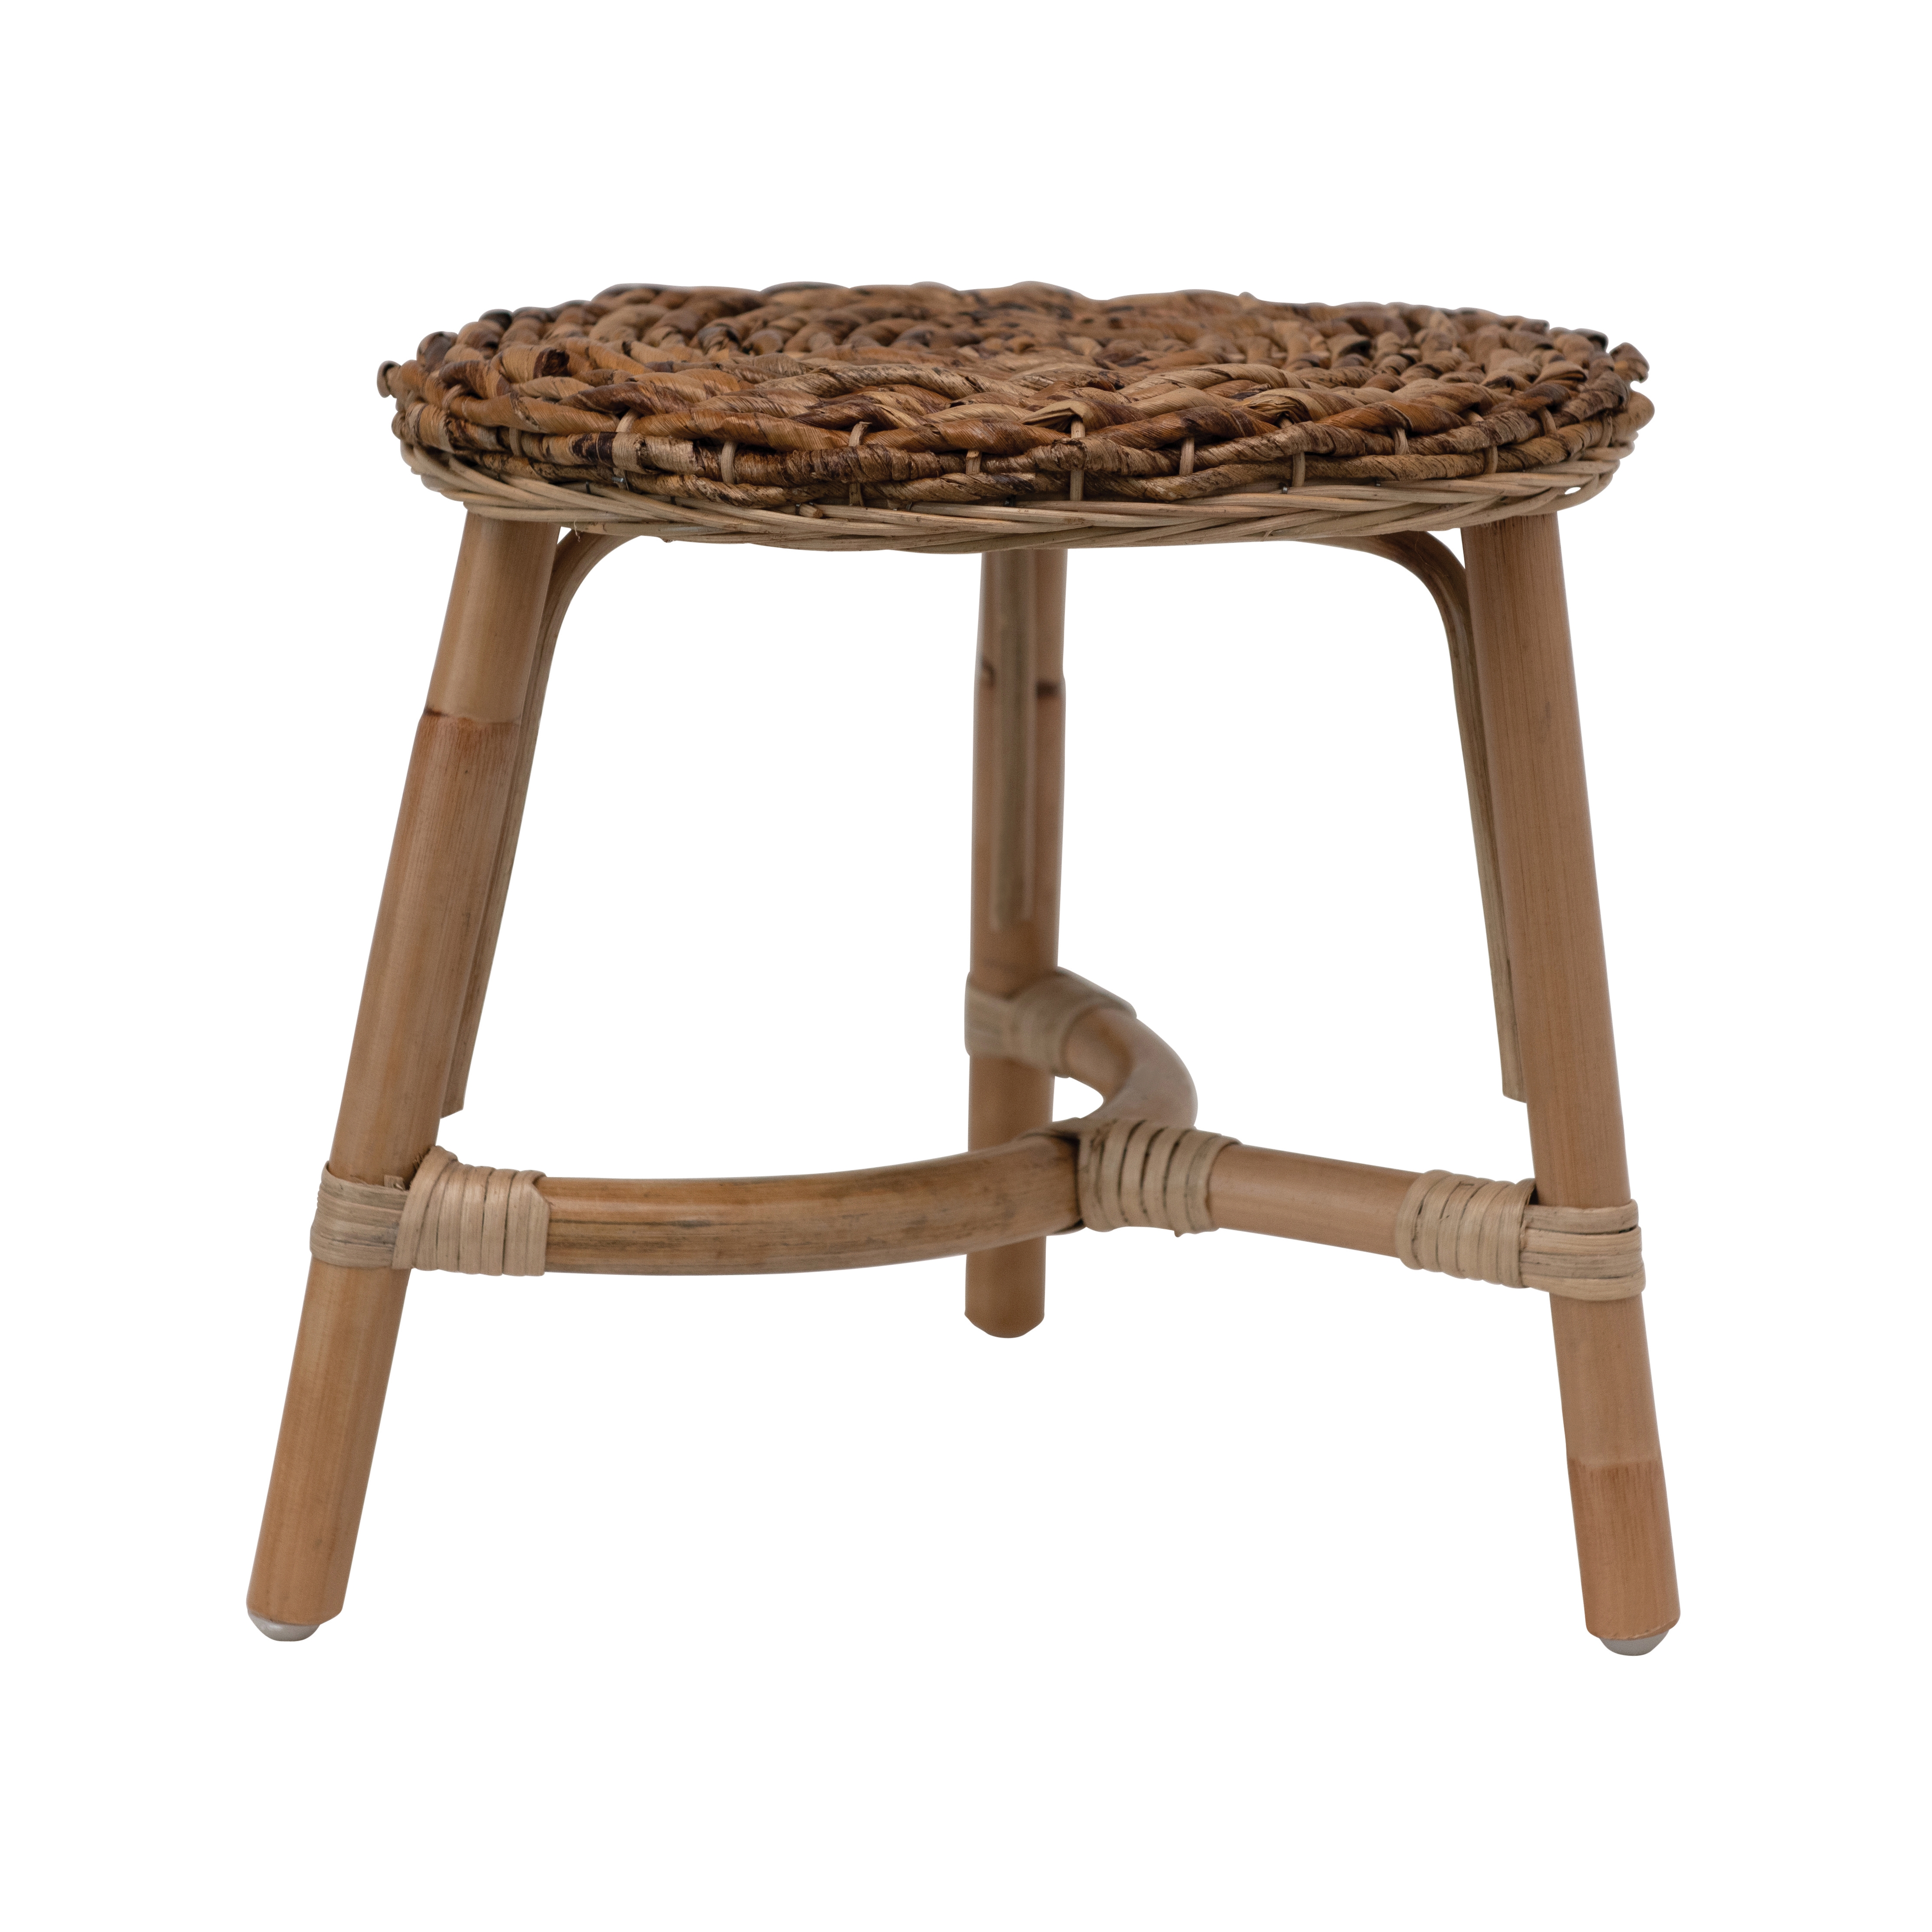 Wood Stool with Rattan Legs - Image 0